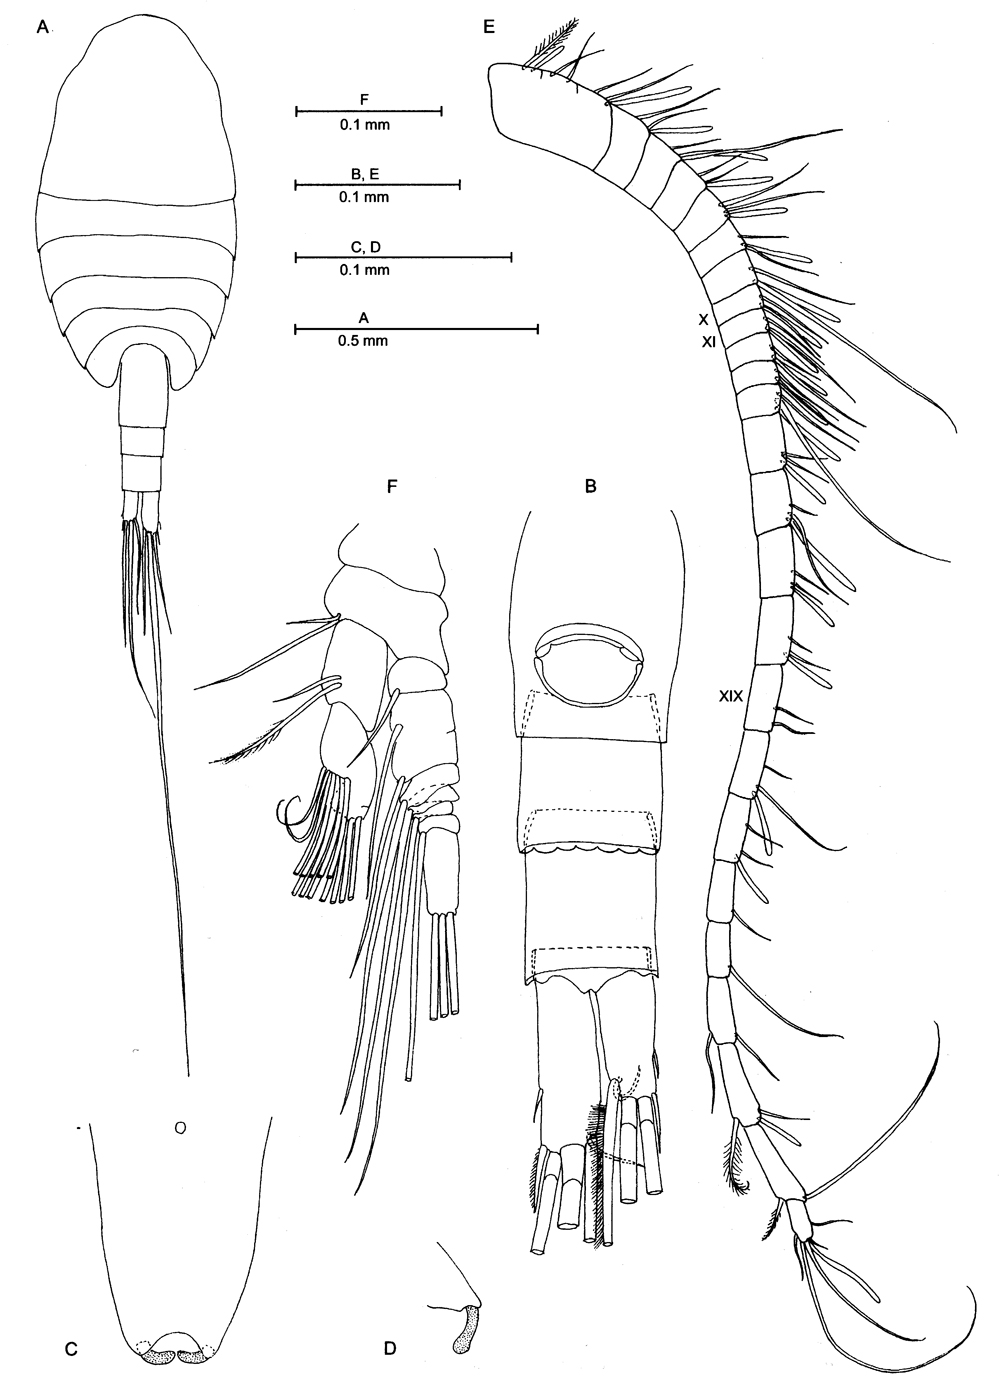 Species Gloinella yagerae - Plate 1 of morphological figures